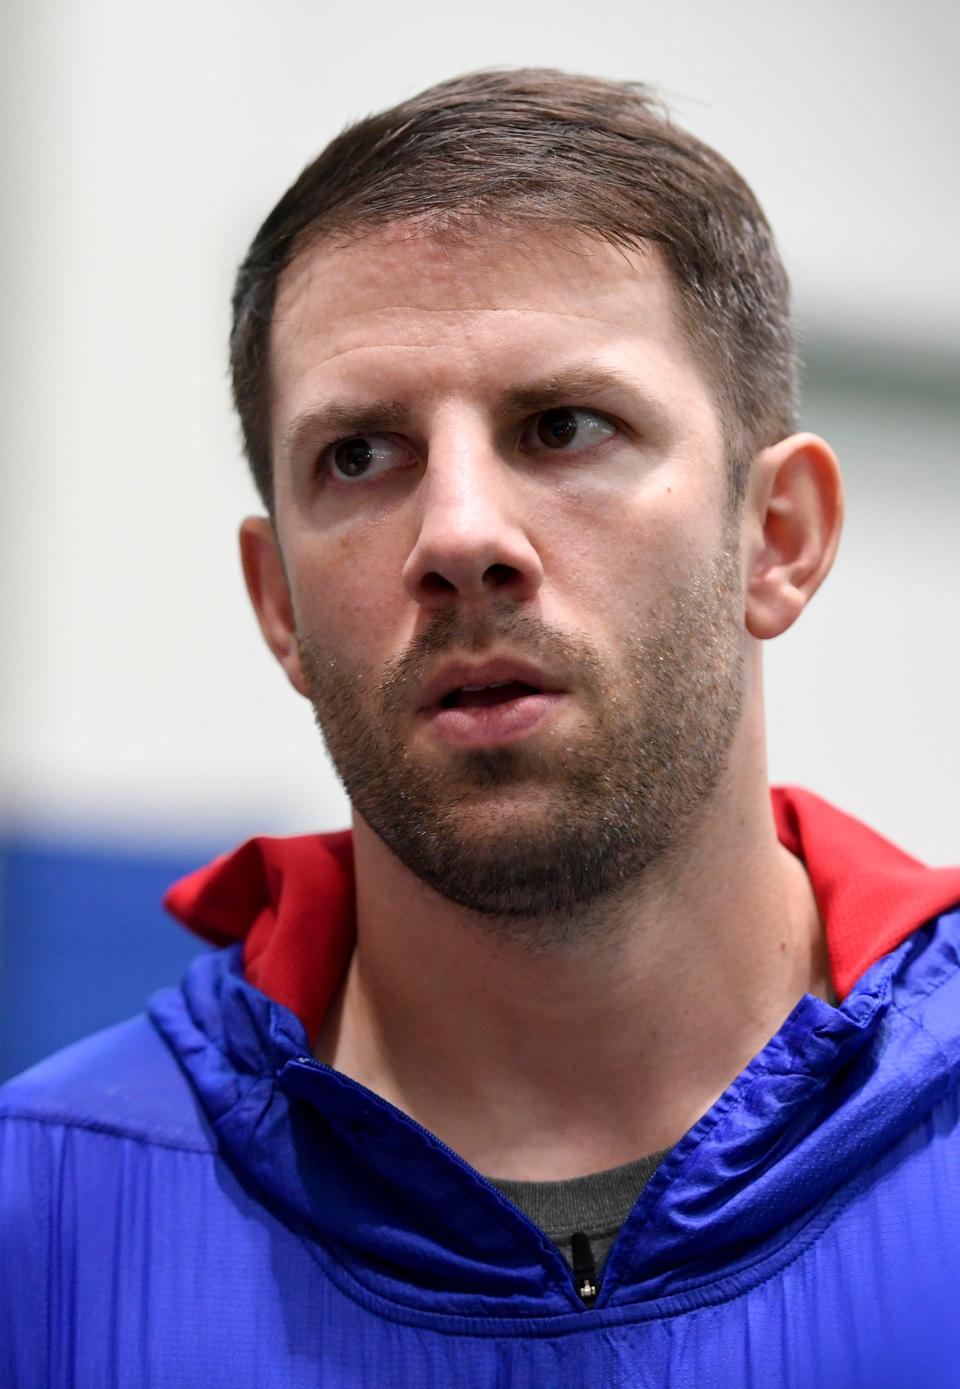 New York Giants quarterback Alex Tanney talks to the media after the fourth day of OTAs on Tuesday, May 28, 2019, in East Rutherford.